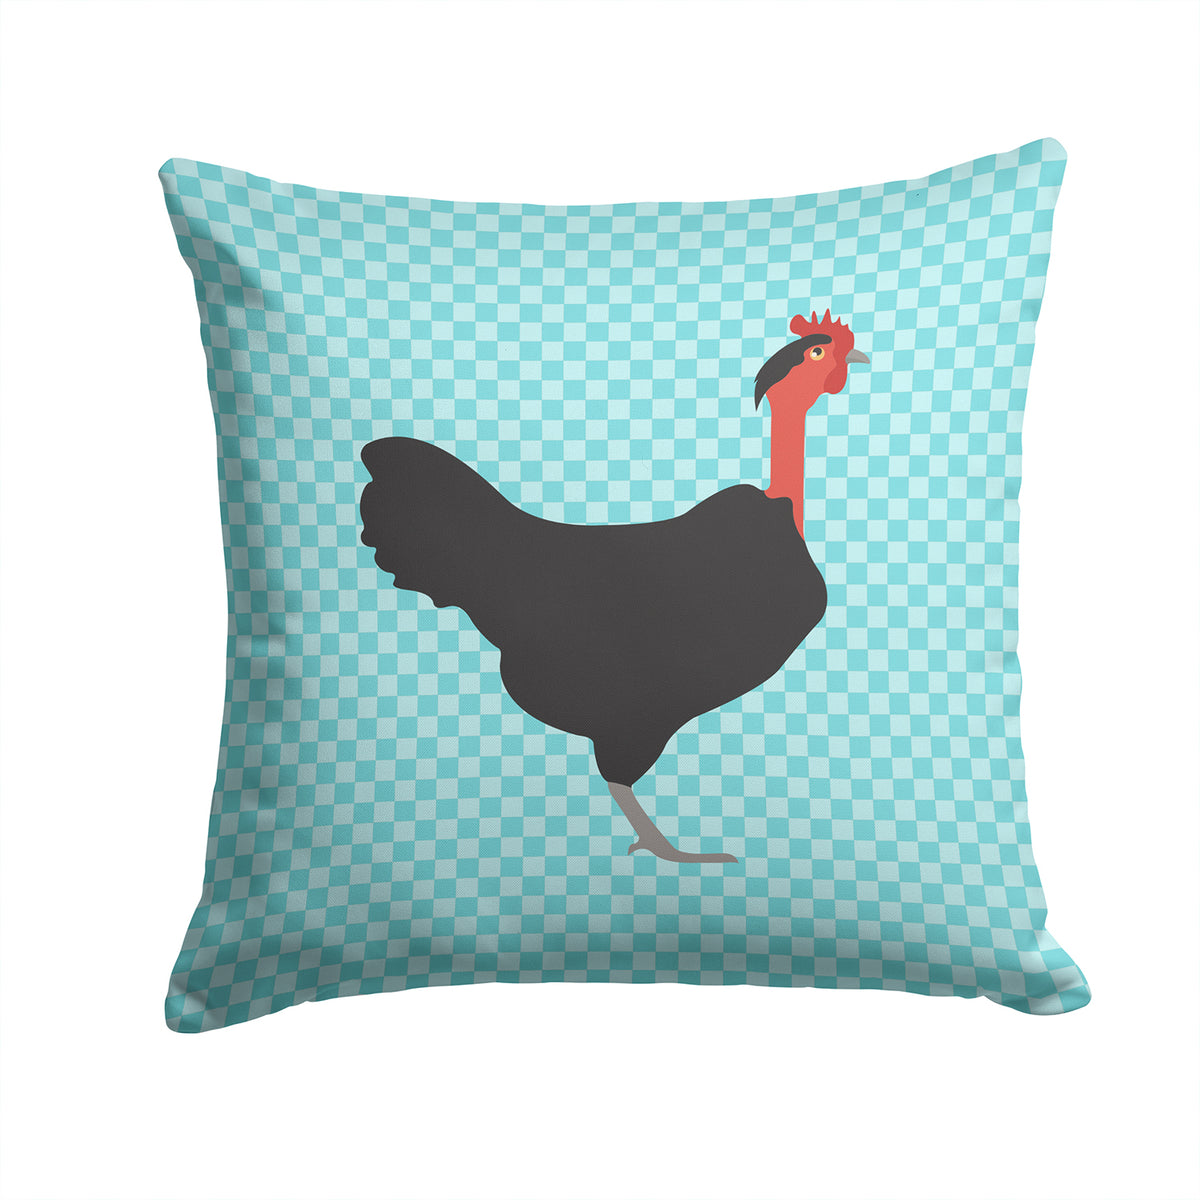 Naked Neck Chicken Blue Check Fabric Decorative Pillow BB8013PW1414 - the-store.com